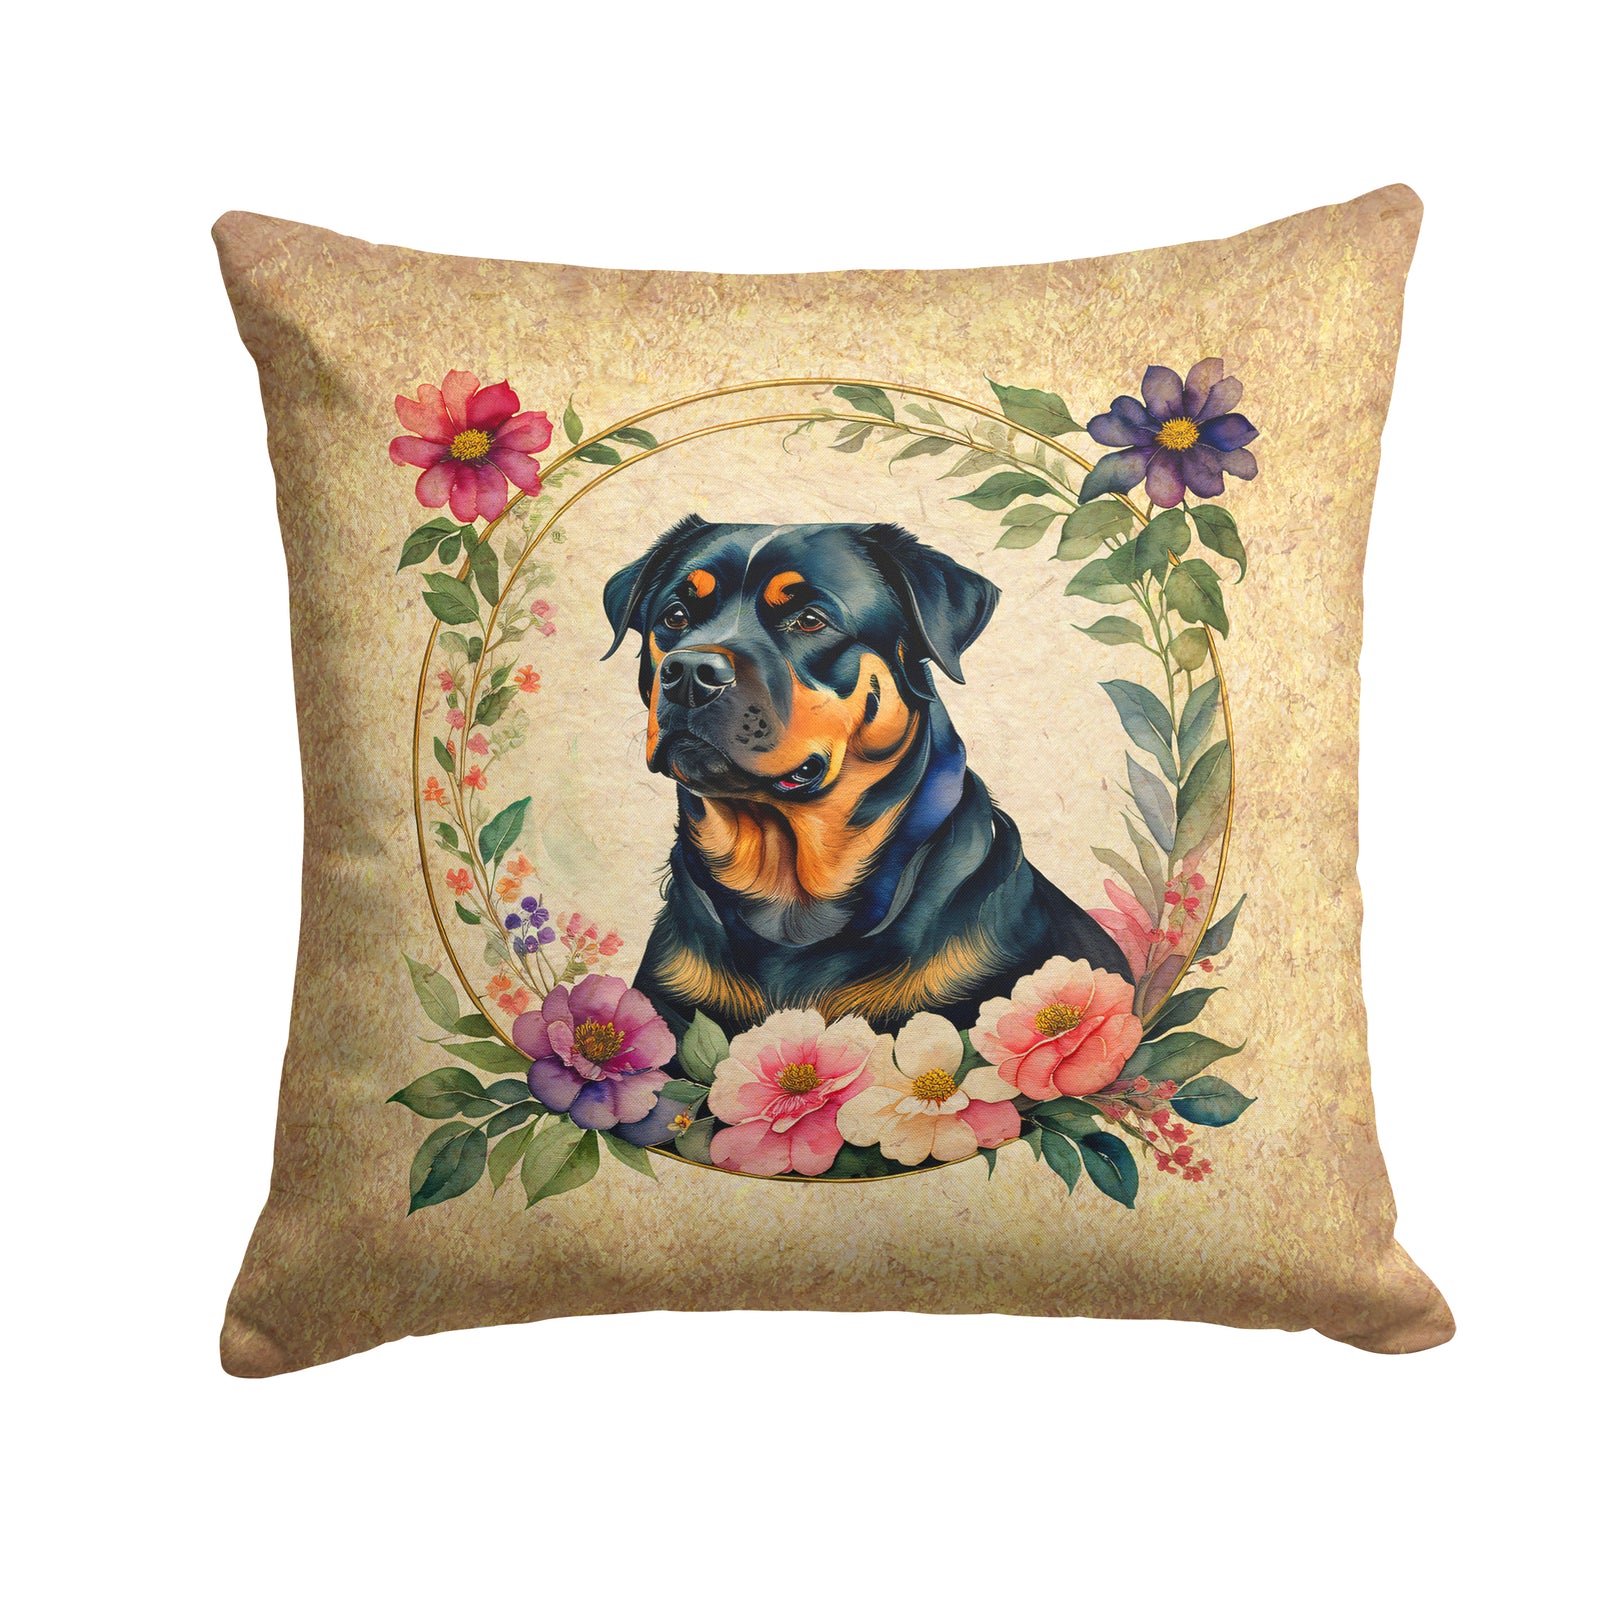 Buy this Rottweiler and Flowers Fabric Decorative Pillow